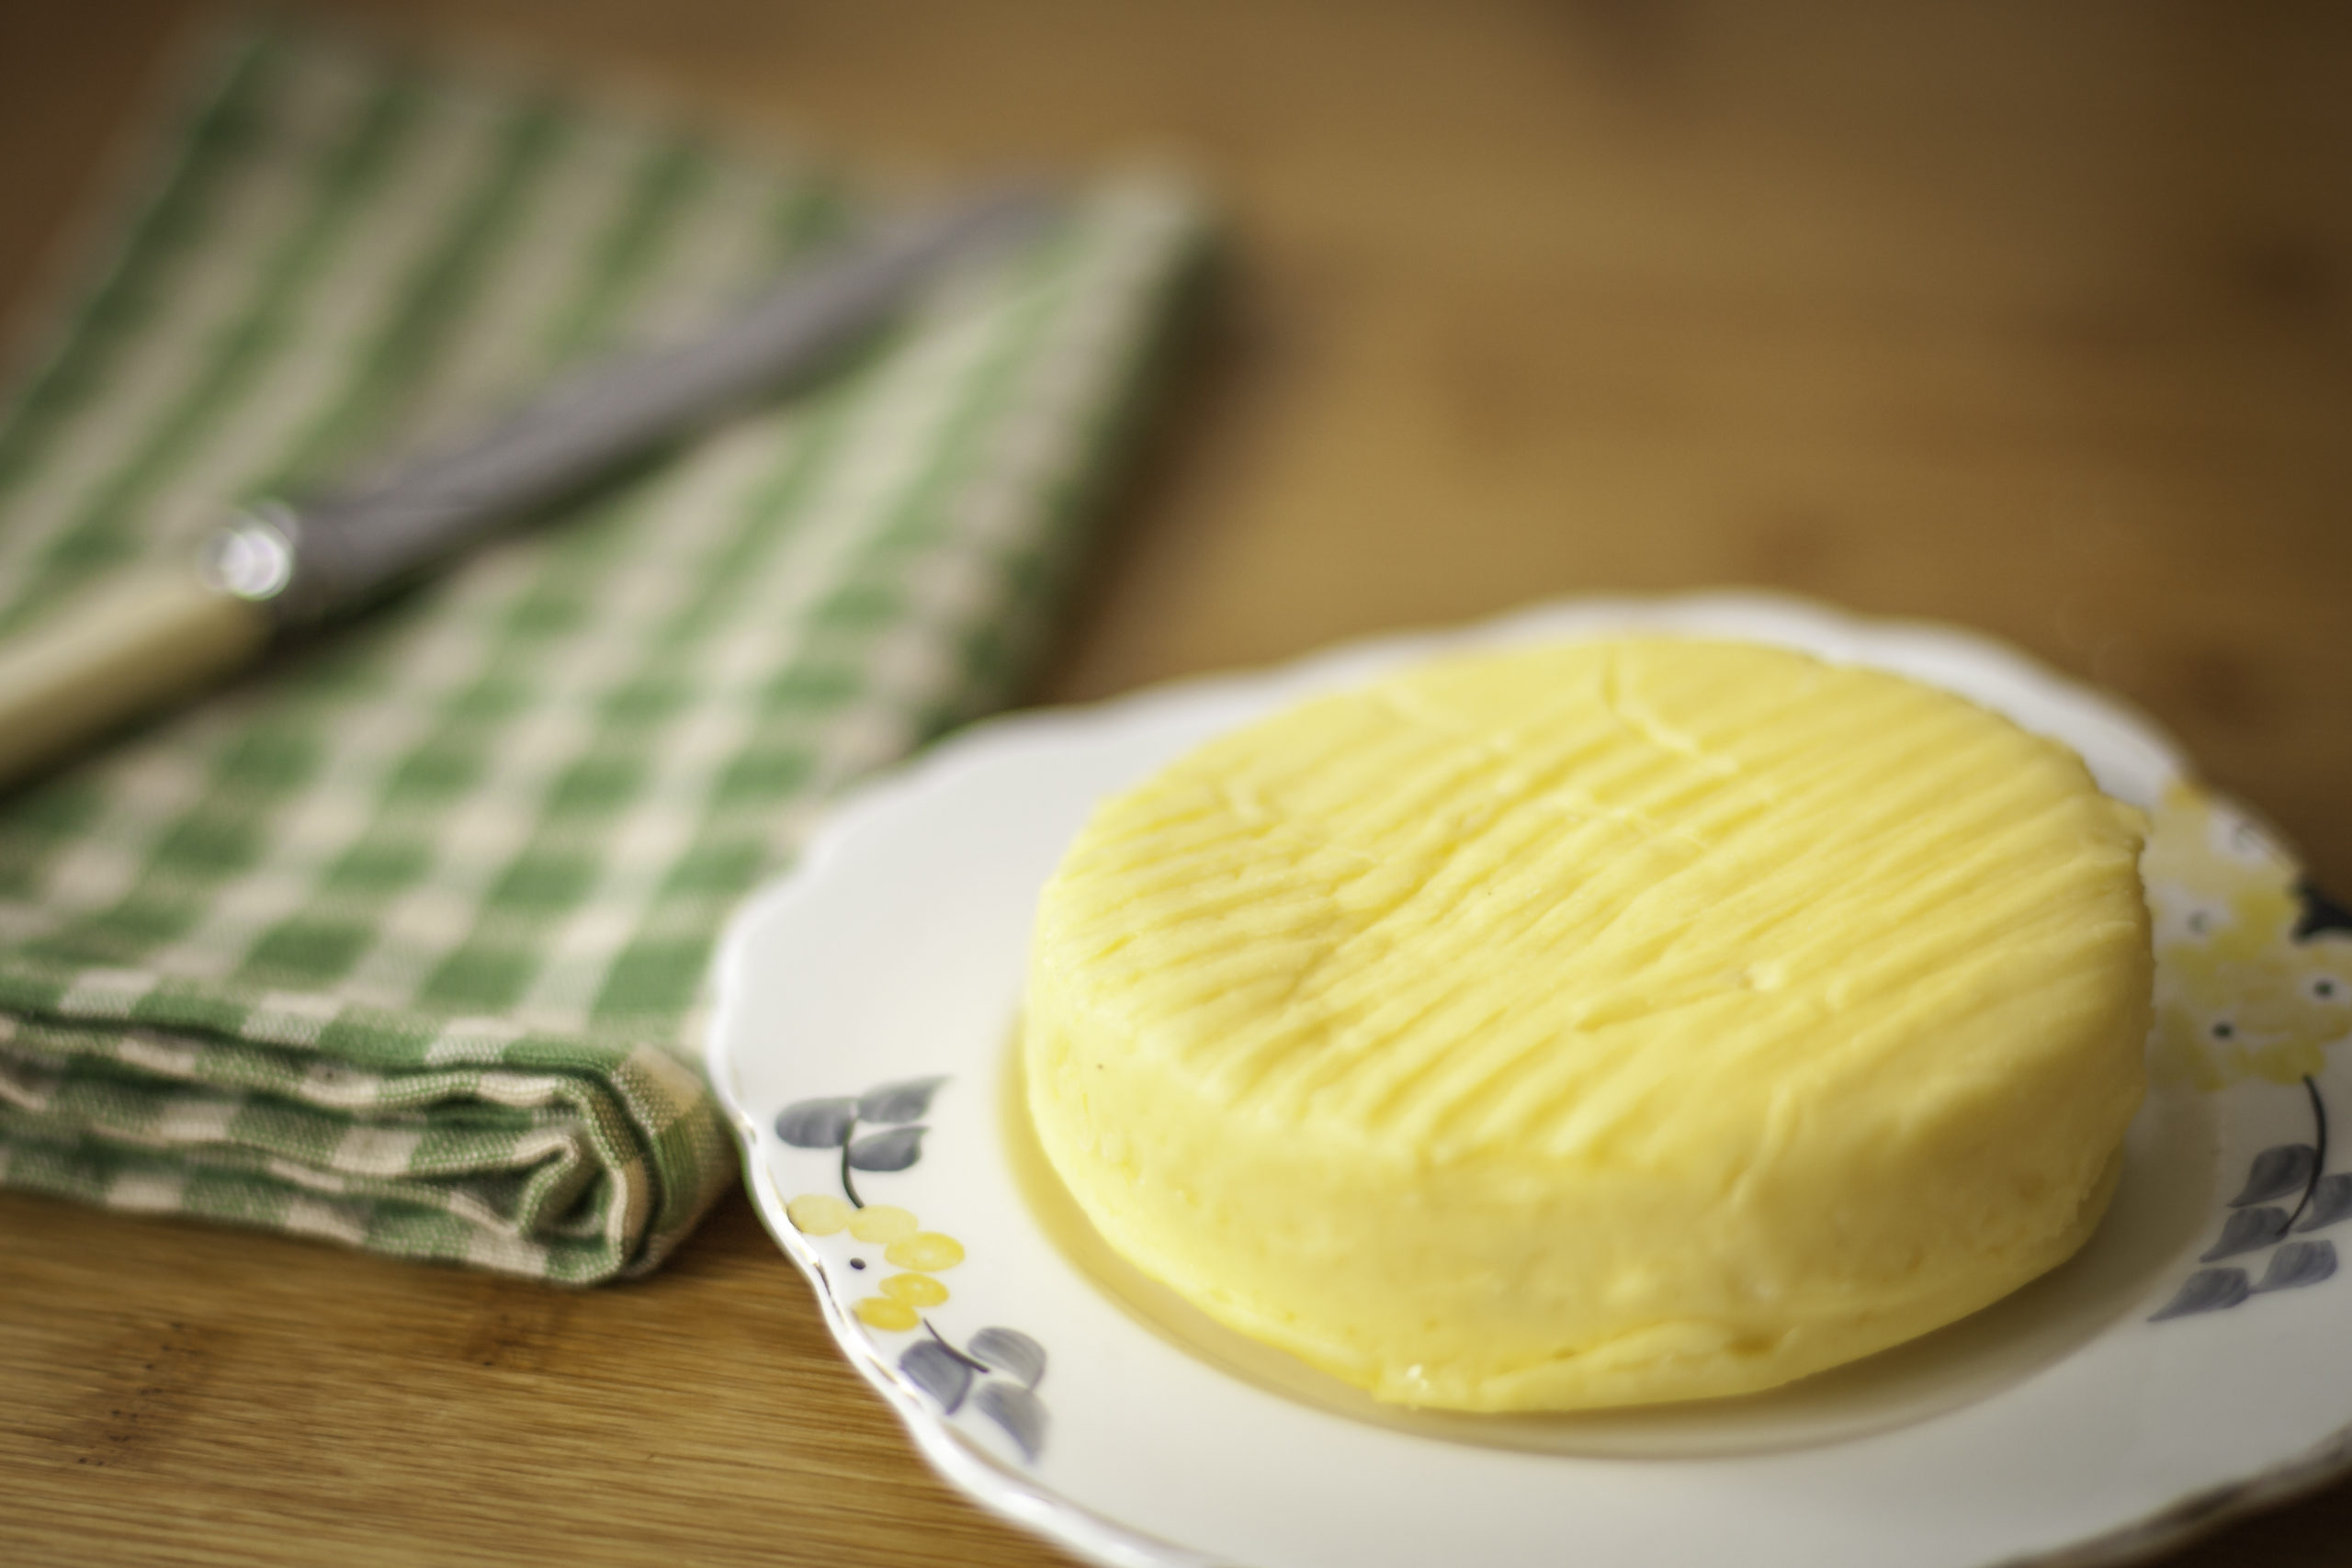 A pad of our delicious raw butter